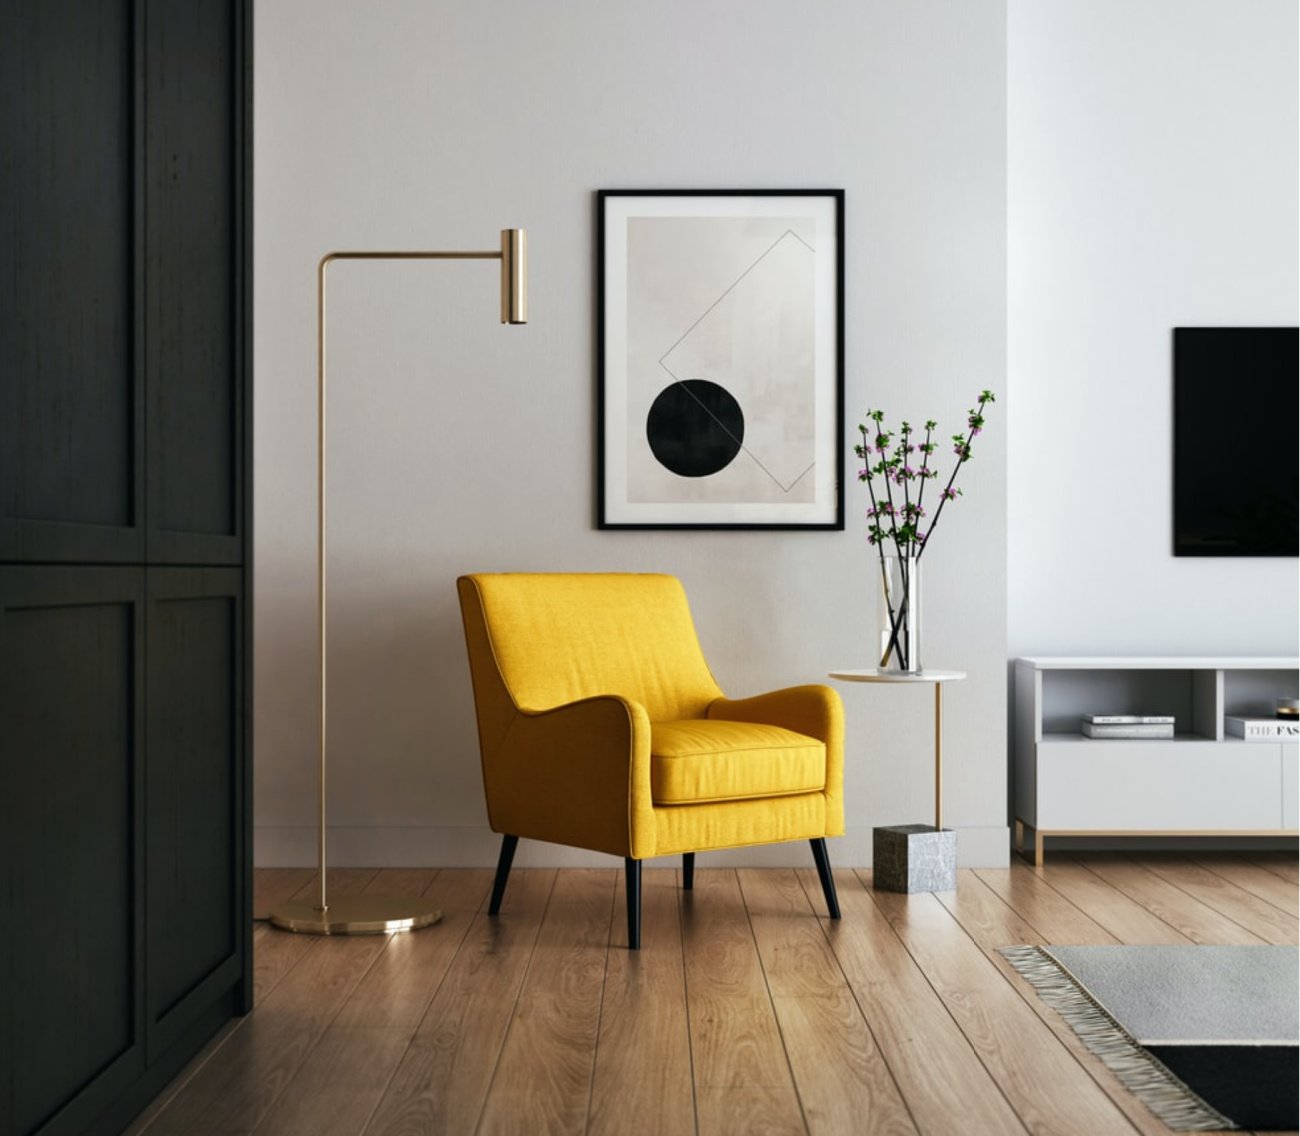 A metallic lamp behind a yellow chair in a living room